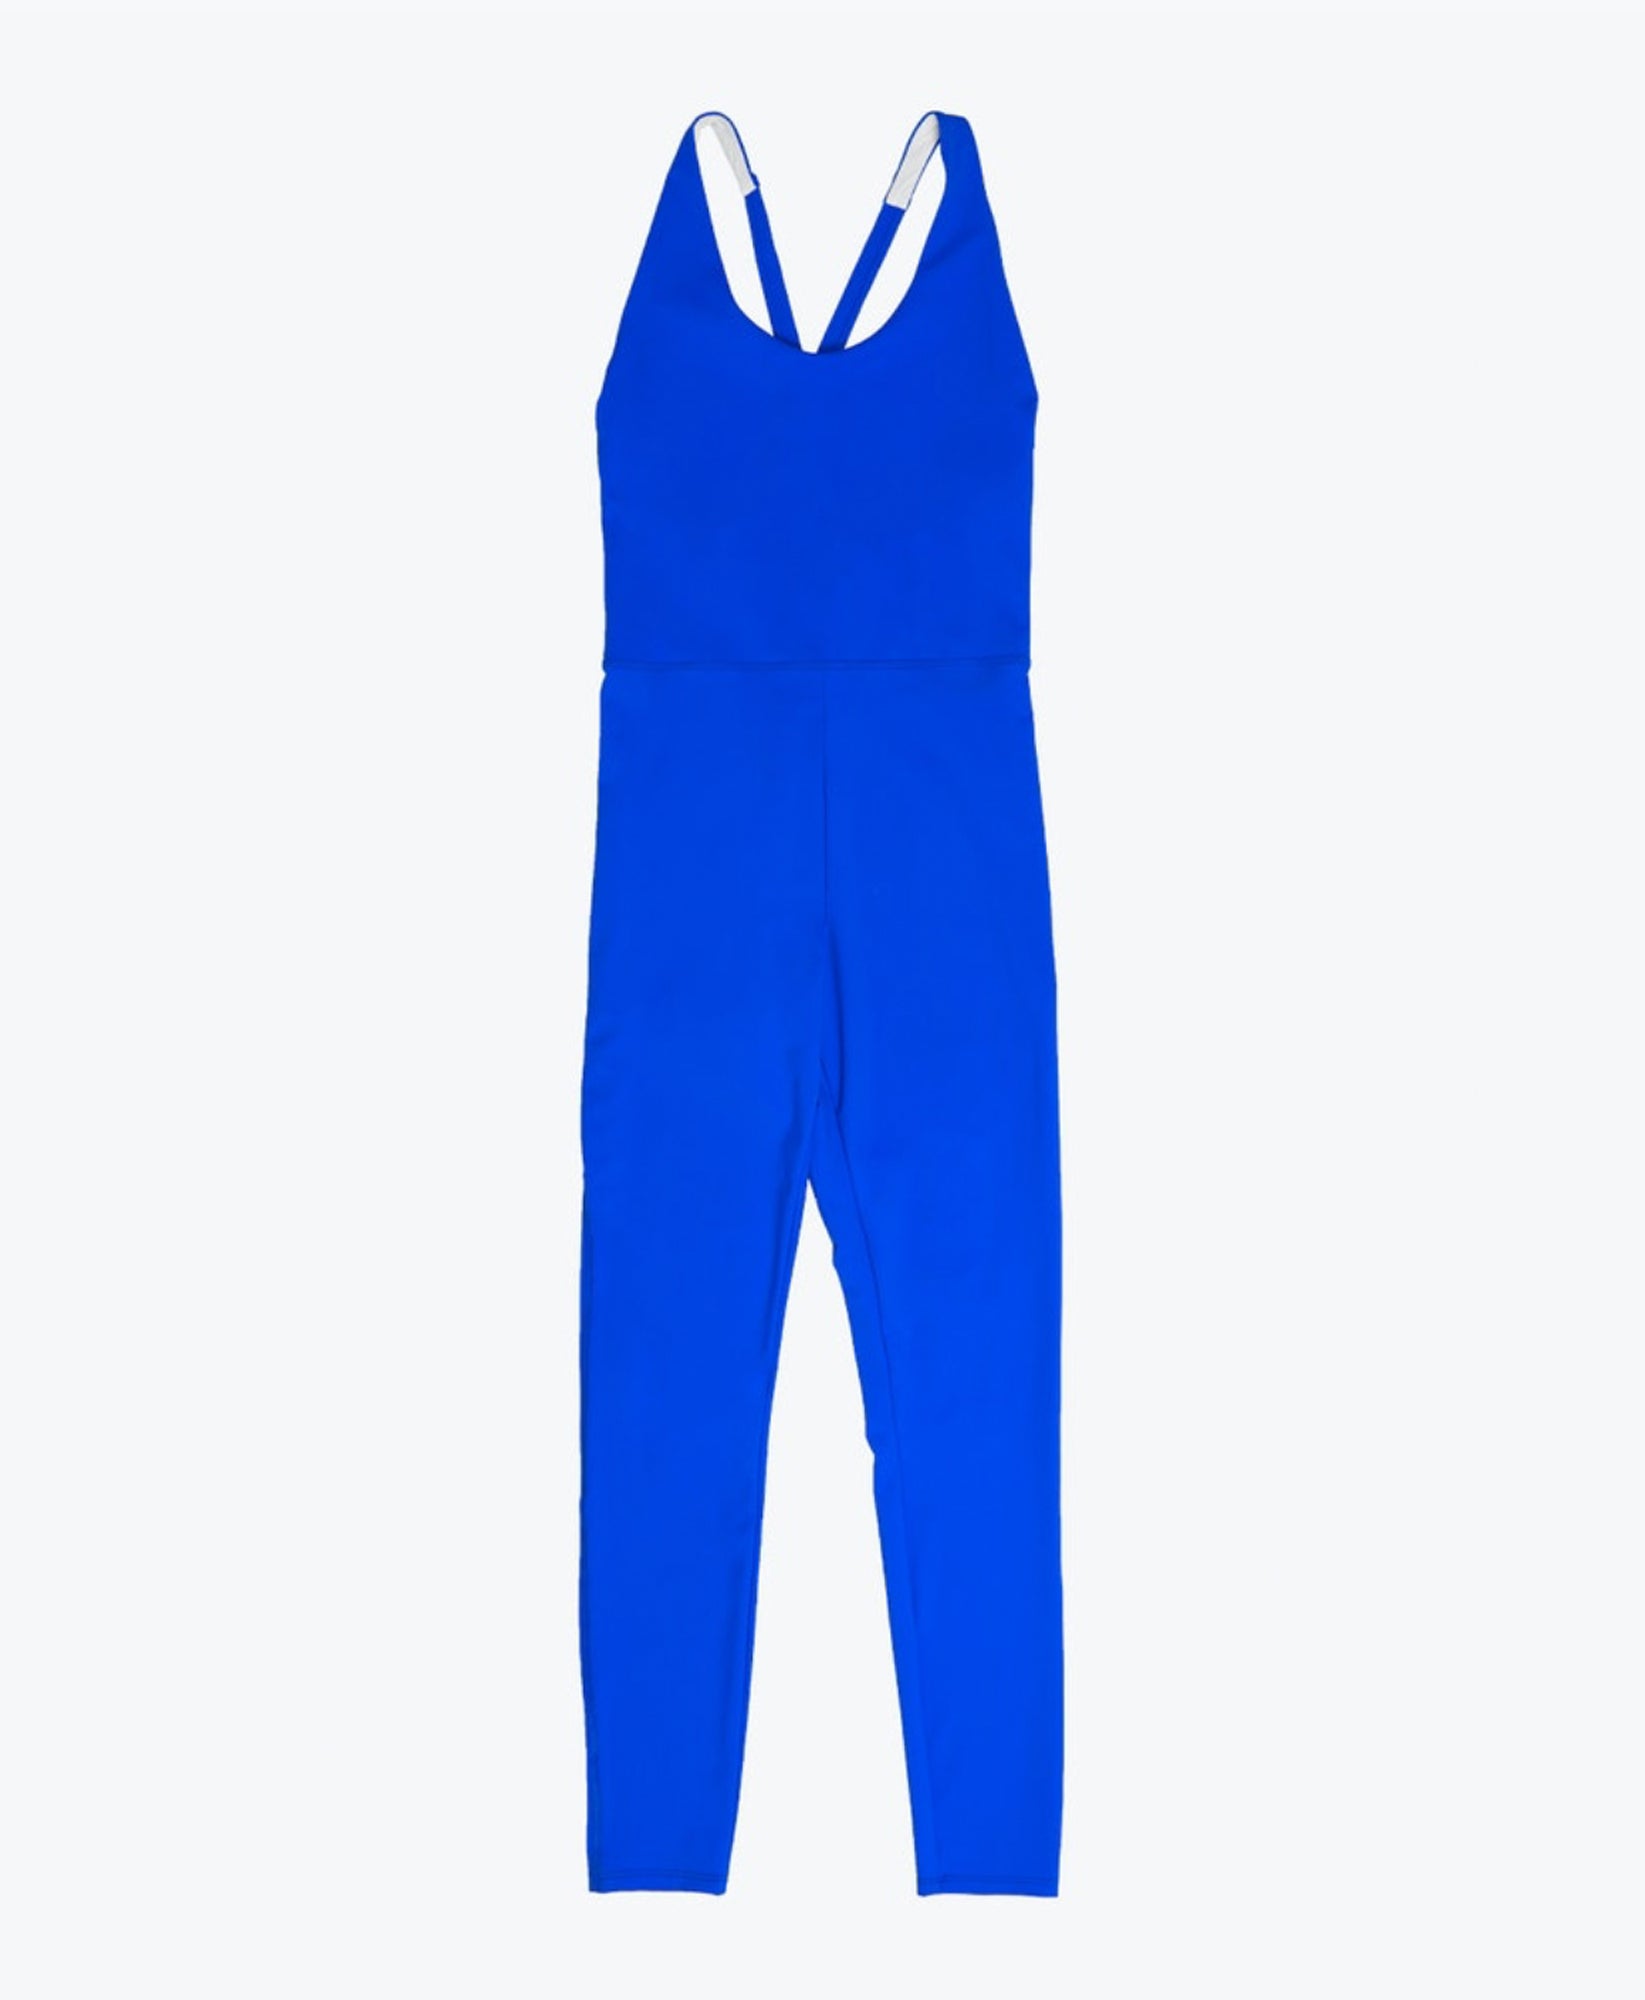 Wear One's At Liberty Unitard in Royal Blue Flat Front